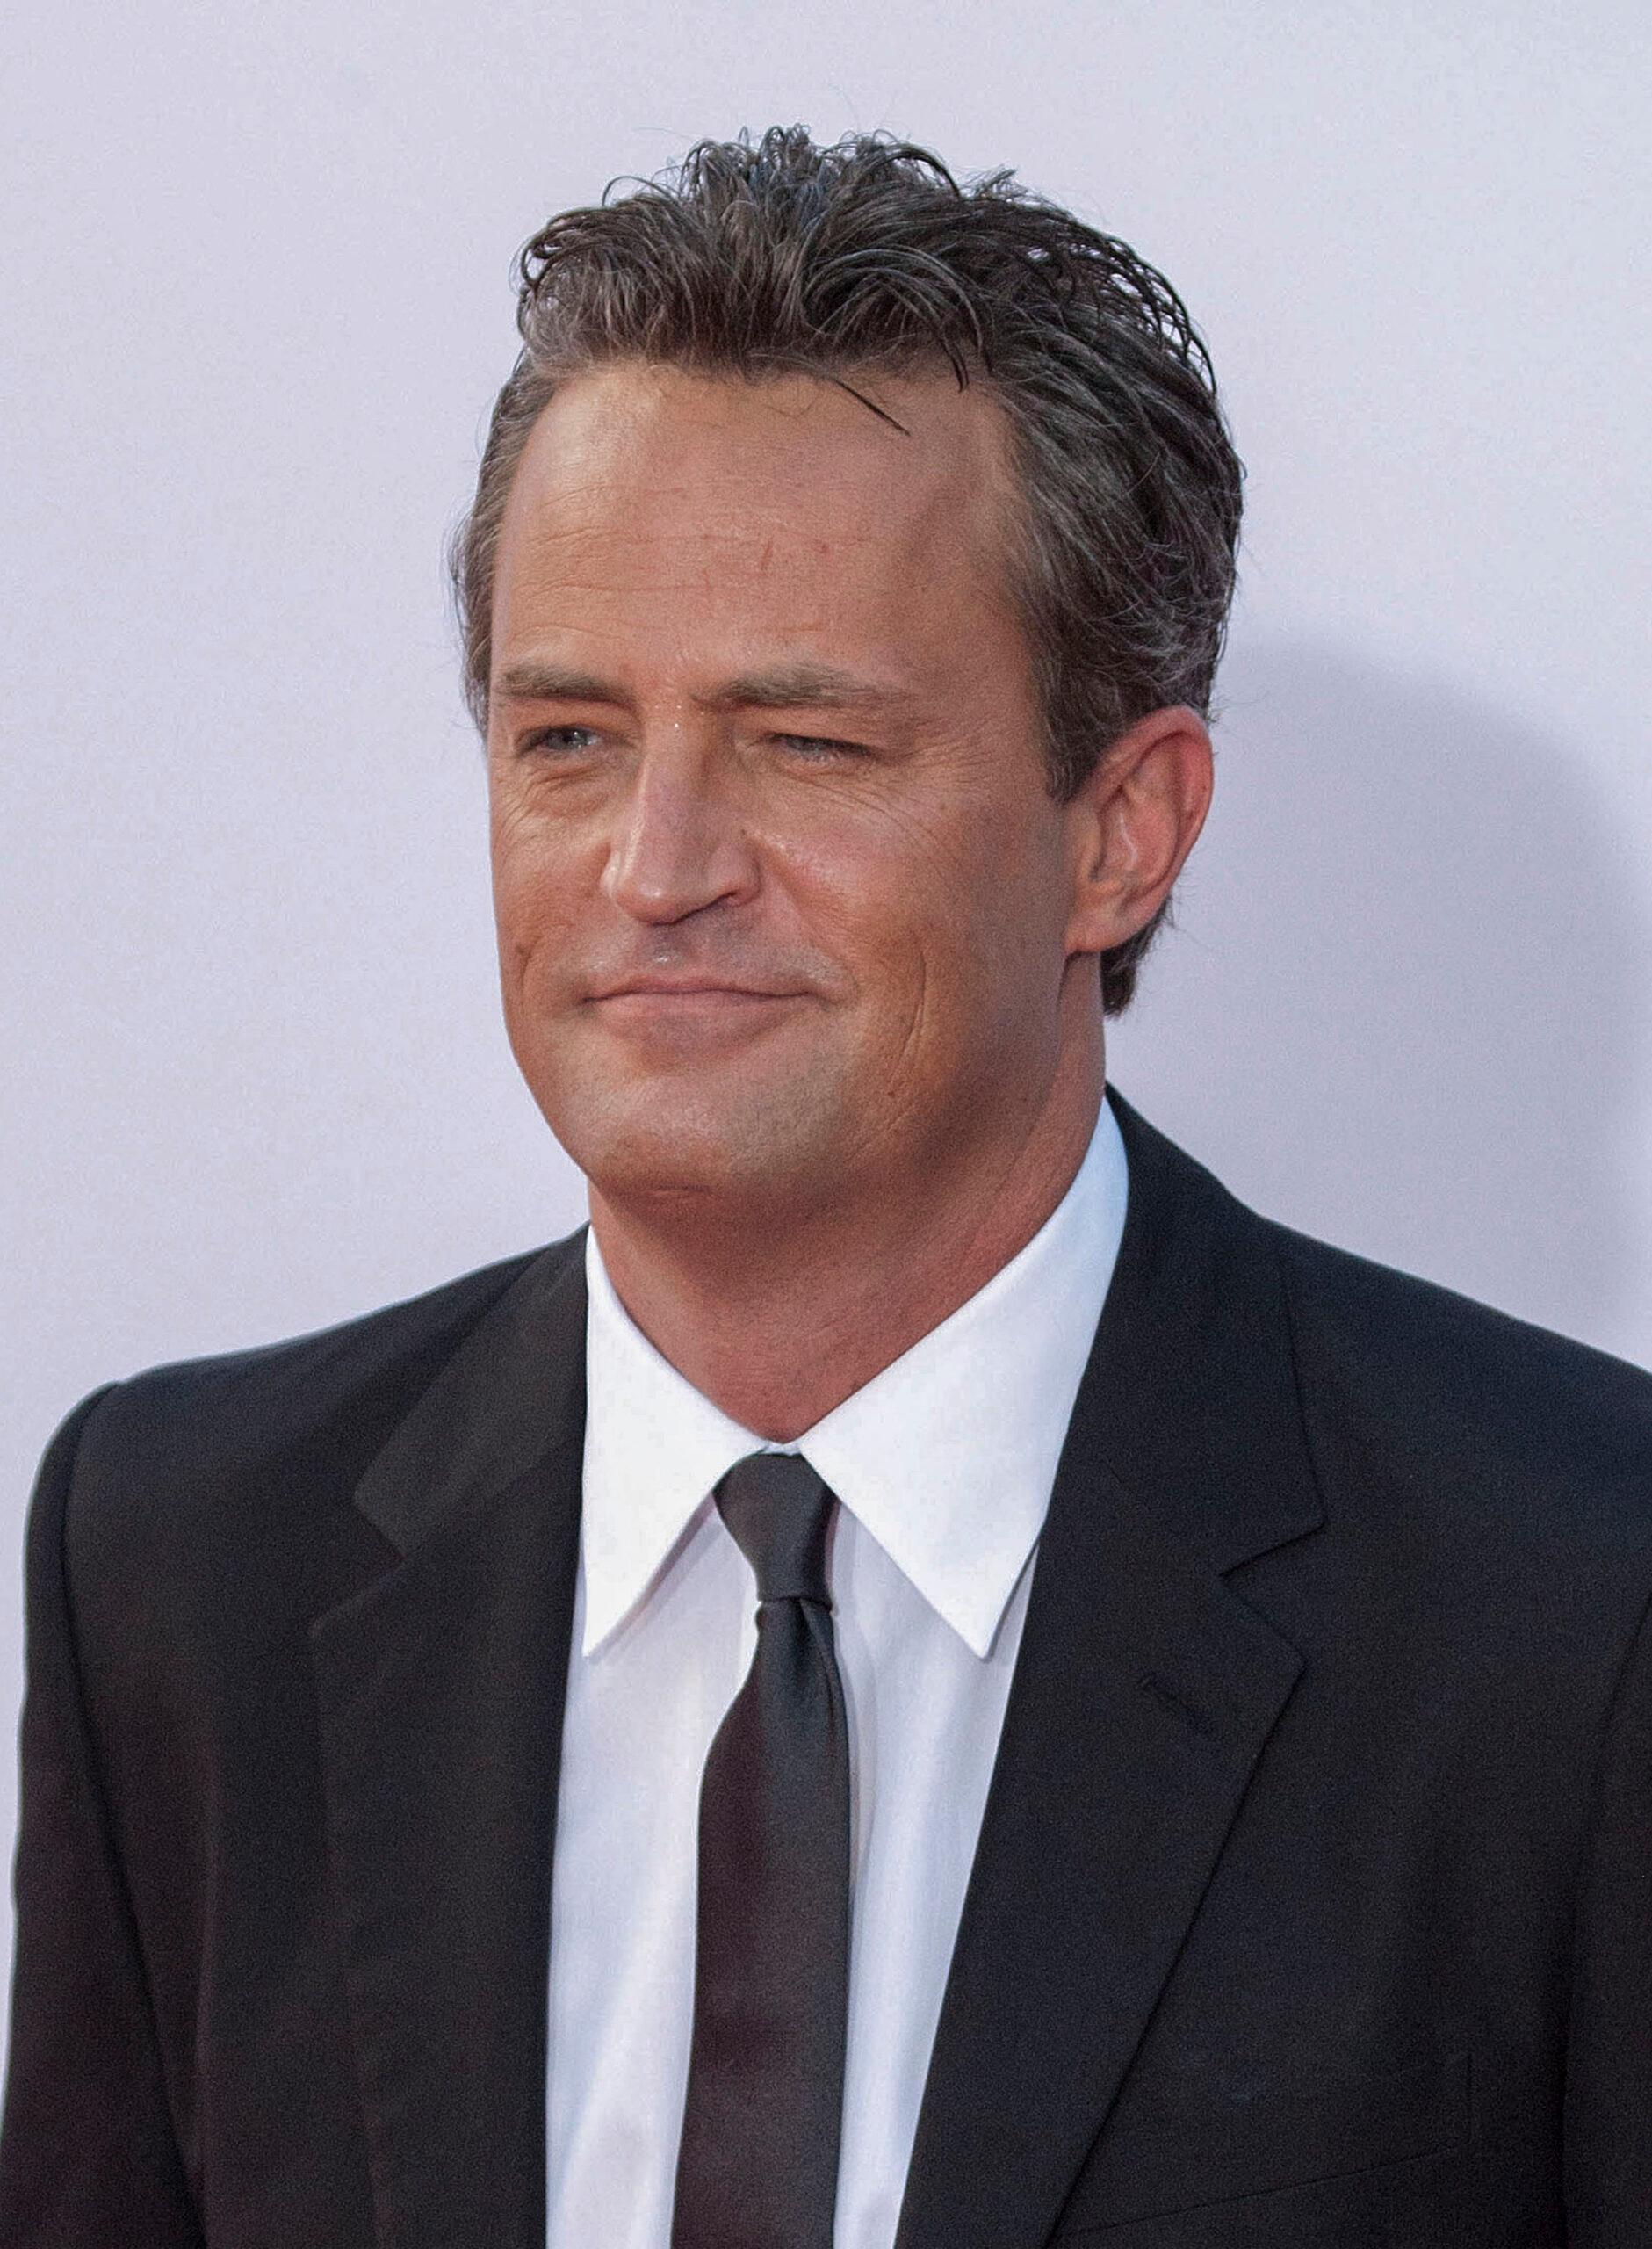 Anti-Depressants, Anti-Anxiety Meds Found In Matthew Perry's Home